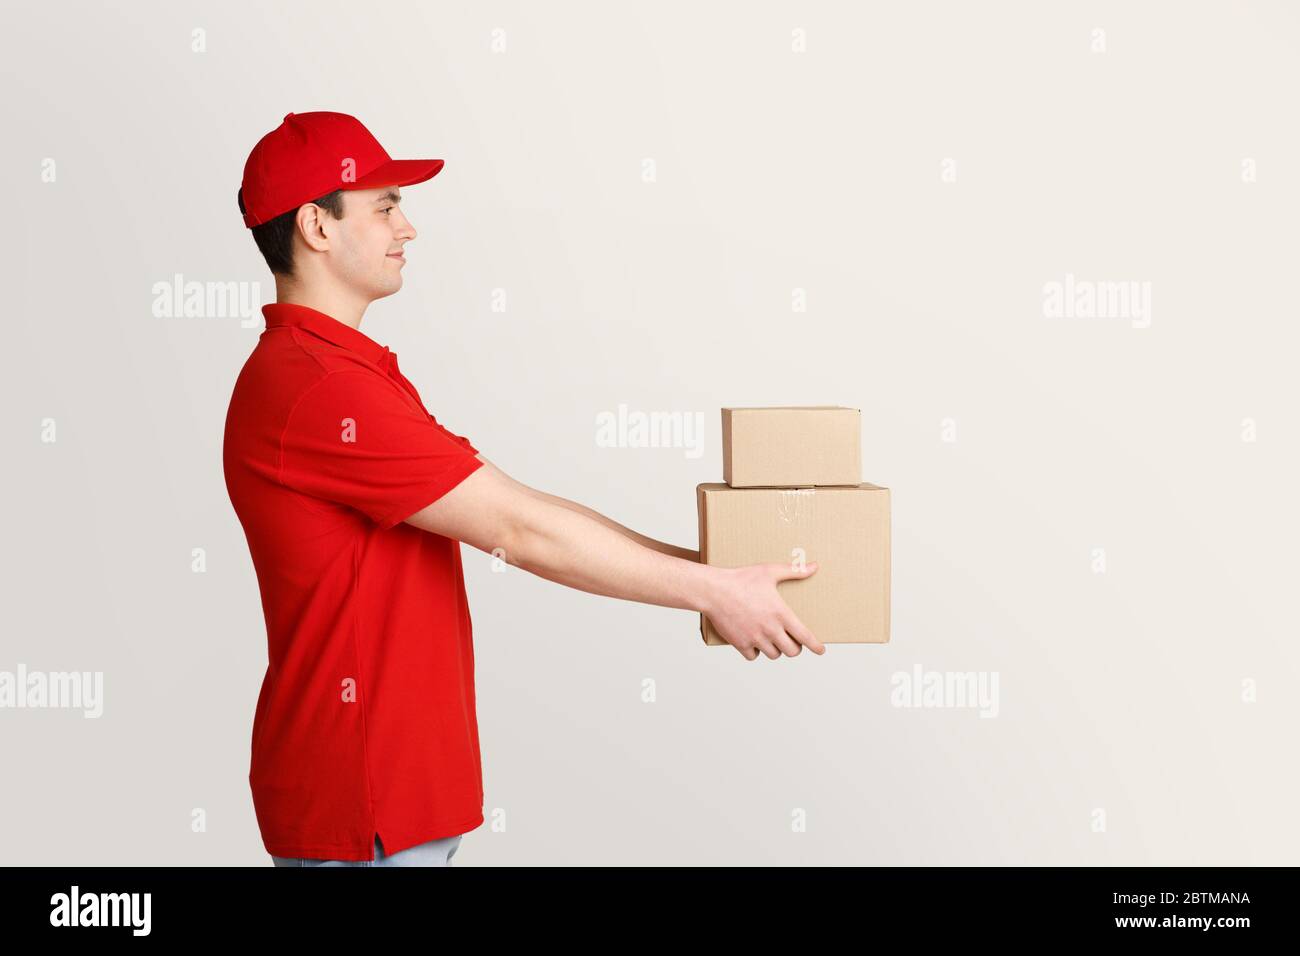 E-commerce purchases delivered to door. Courier holds boxes in hands Stock Photo